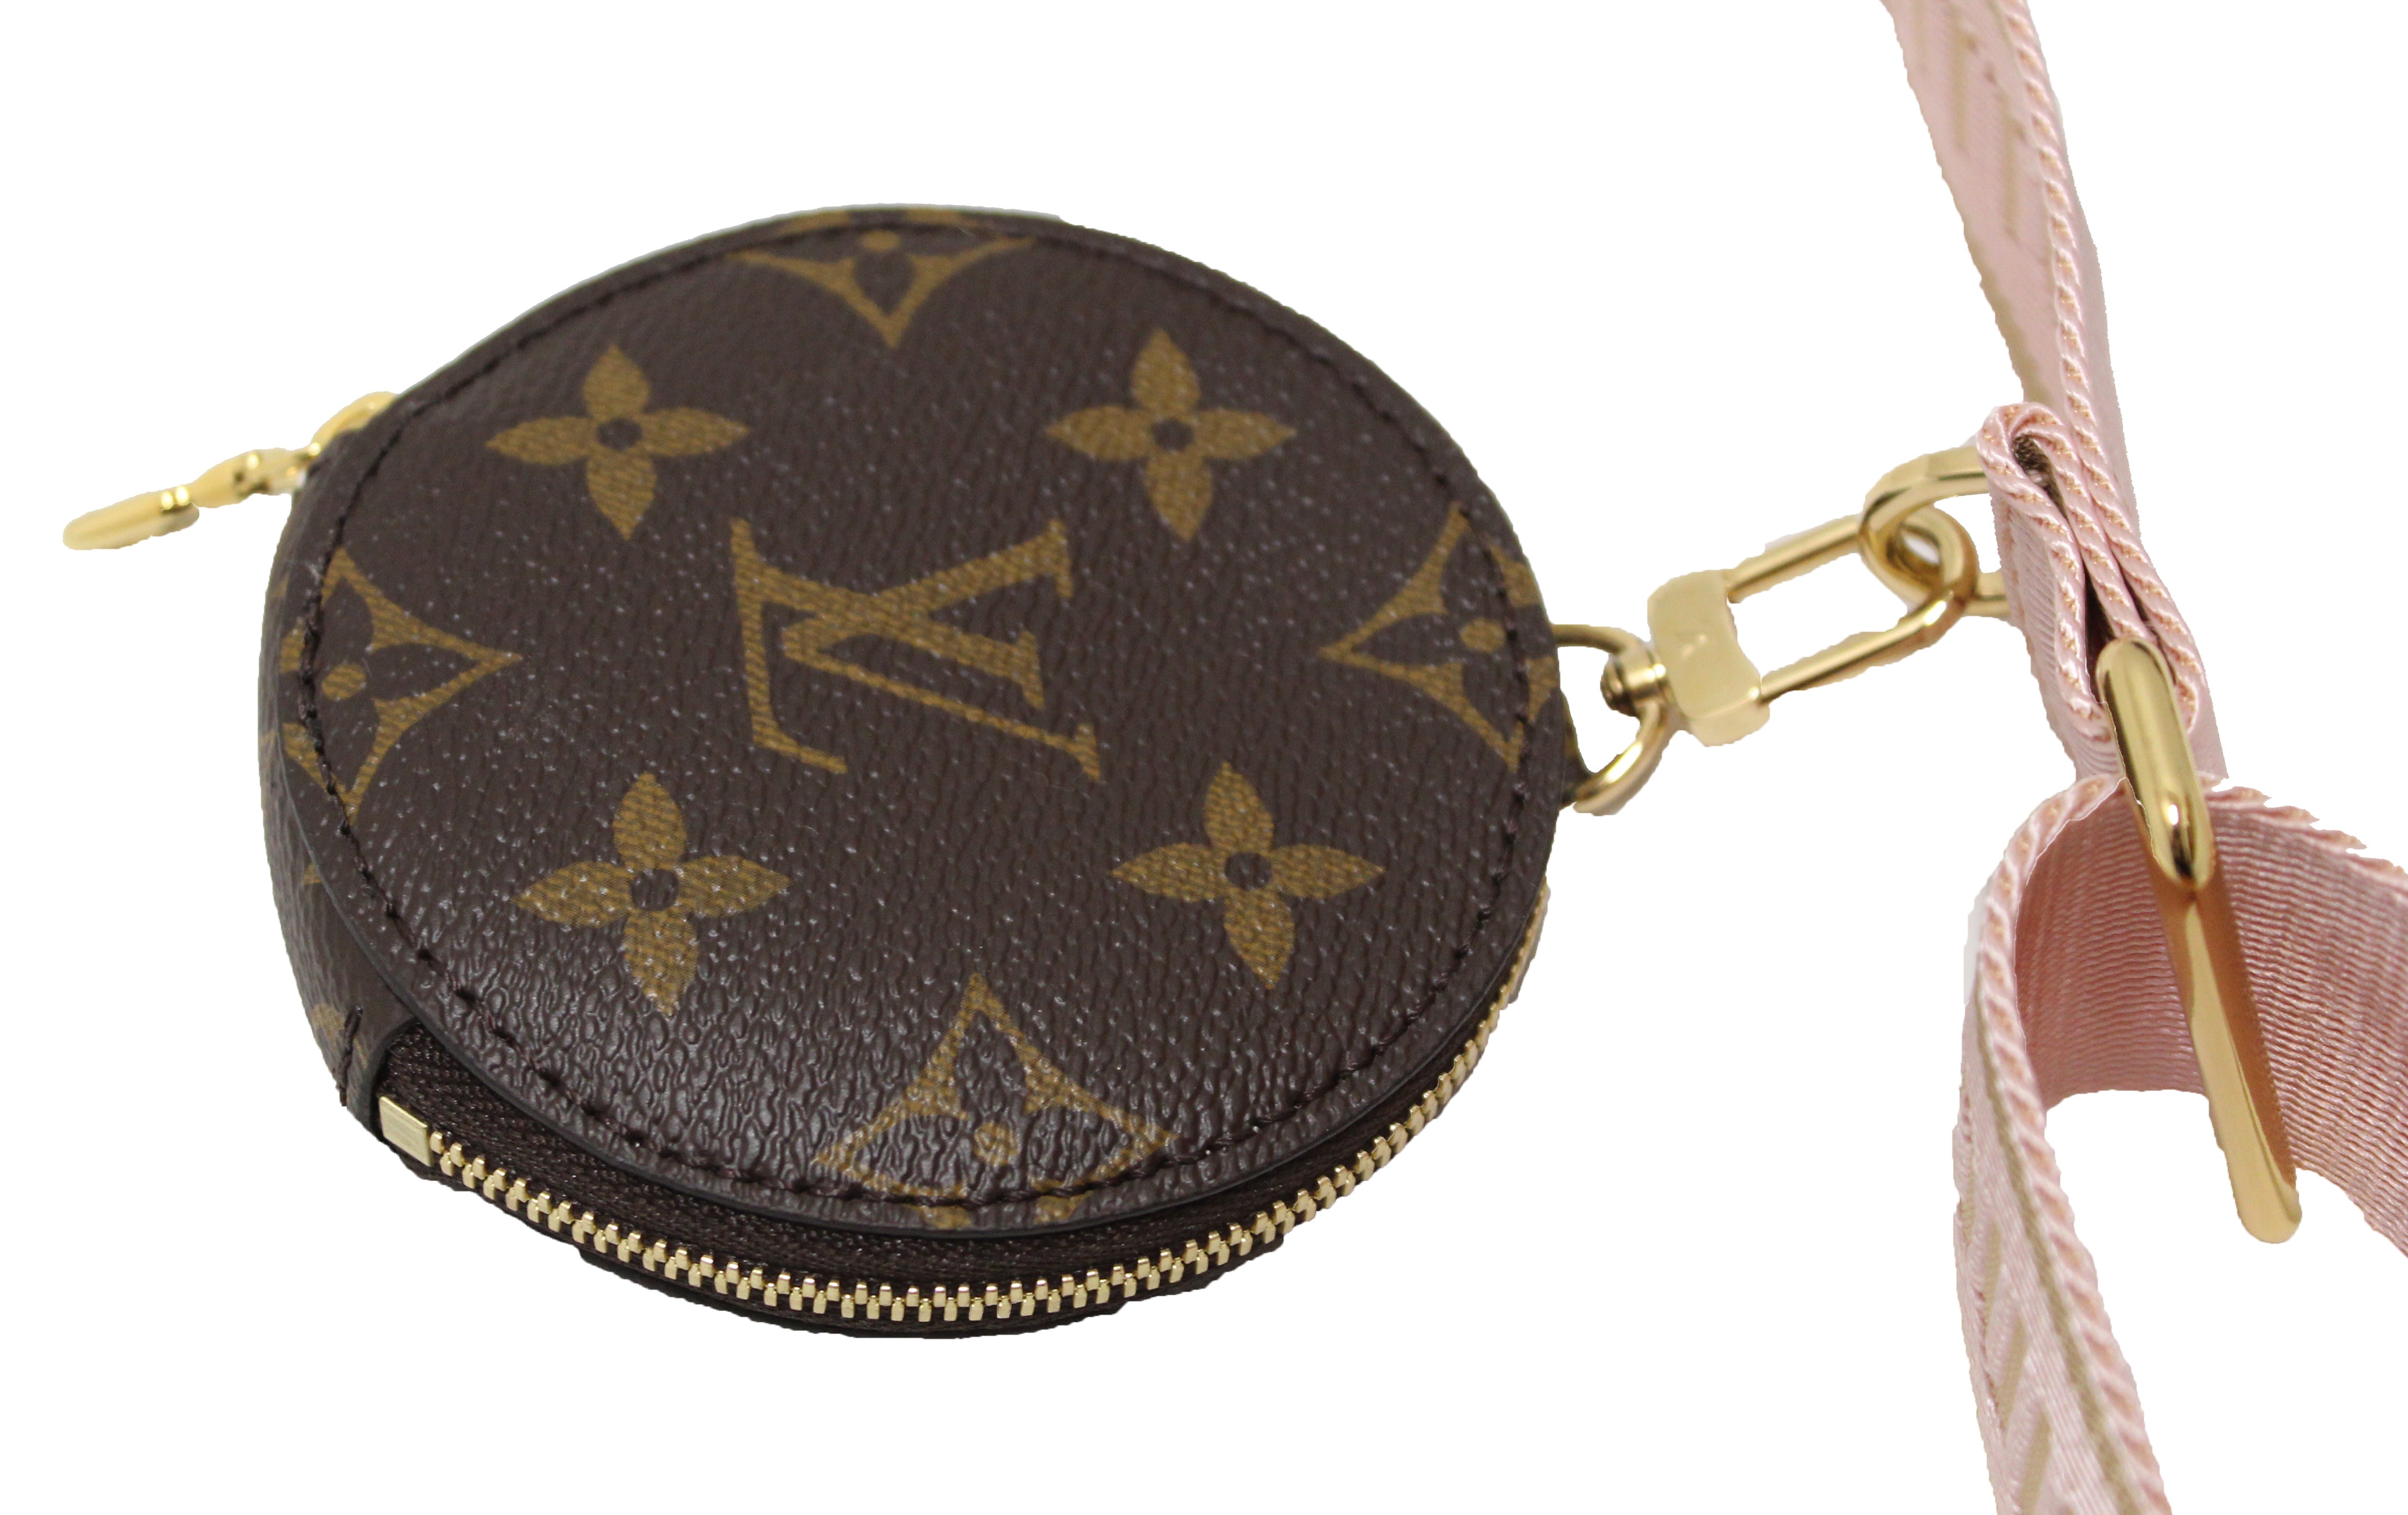 Authentic- New Louis Vuitton Round Coin Purse